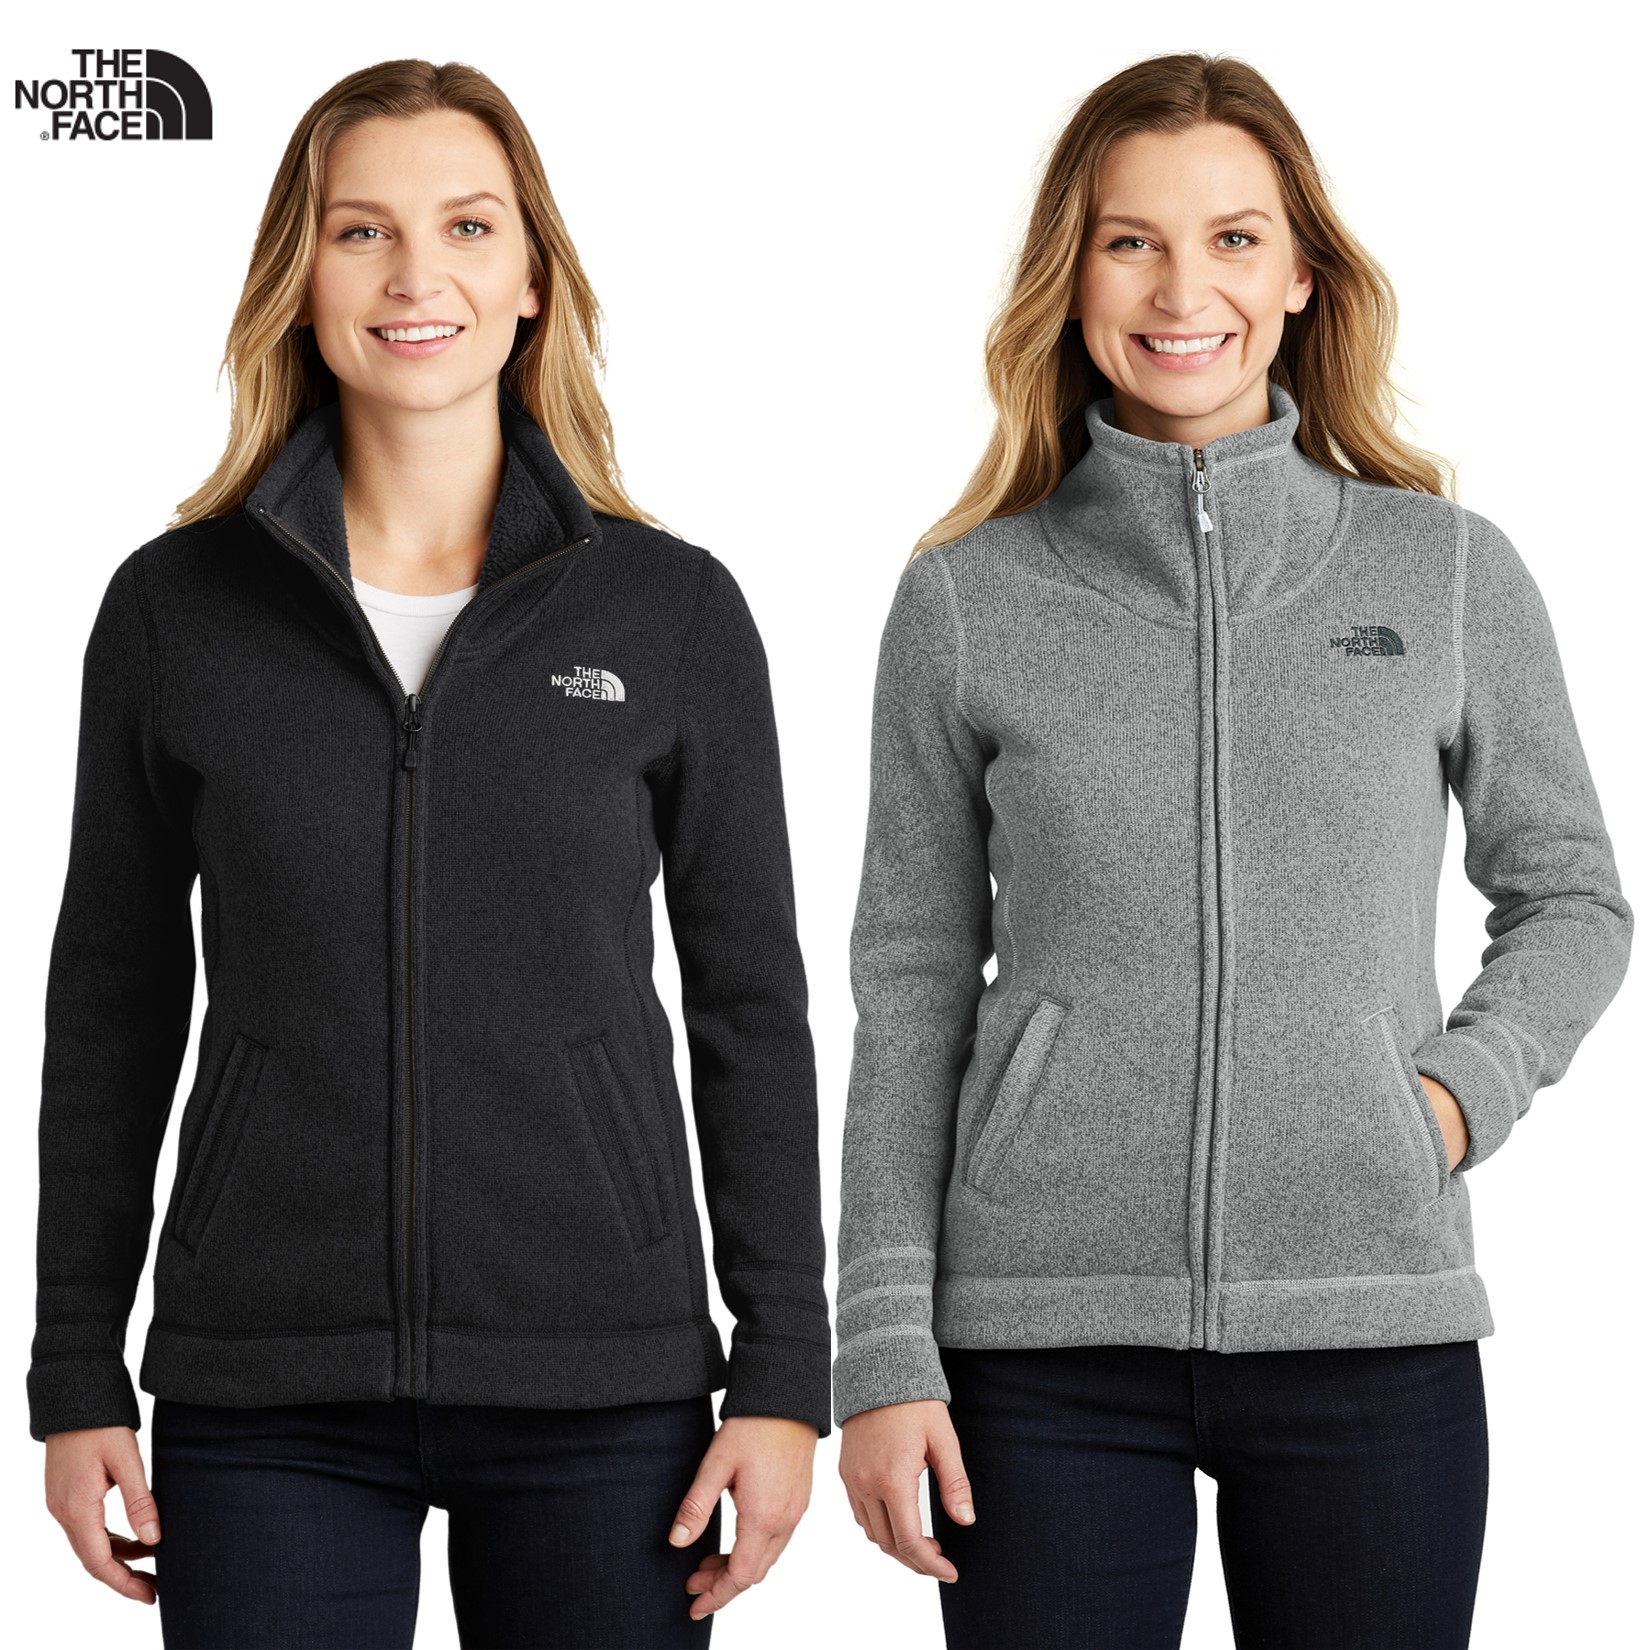 The North Face® Ladies Sweater Jacket | Embroidered